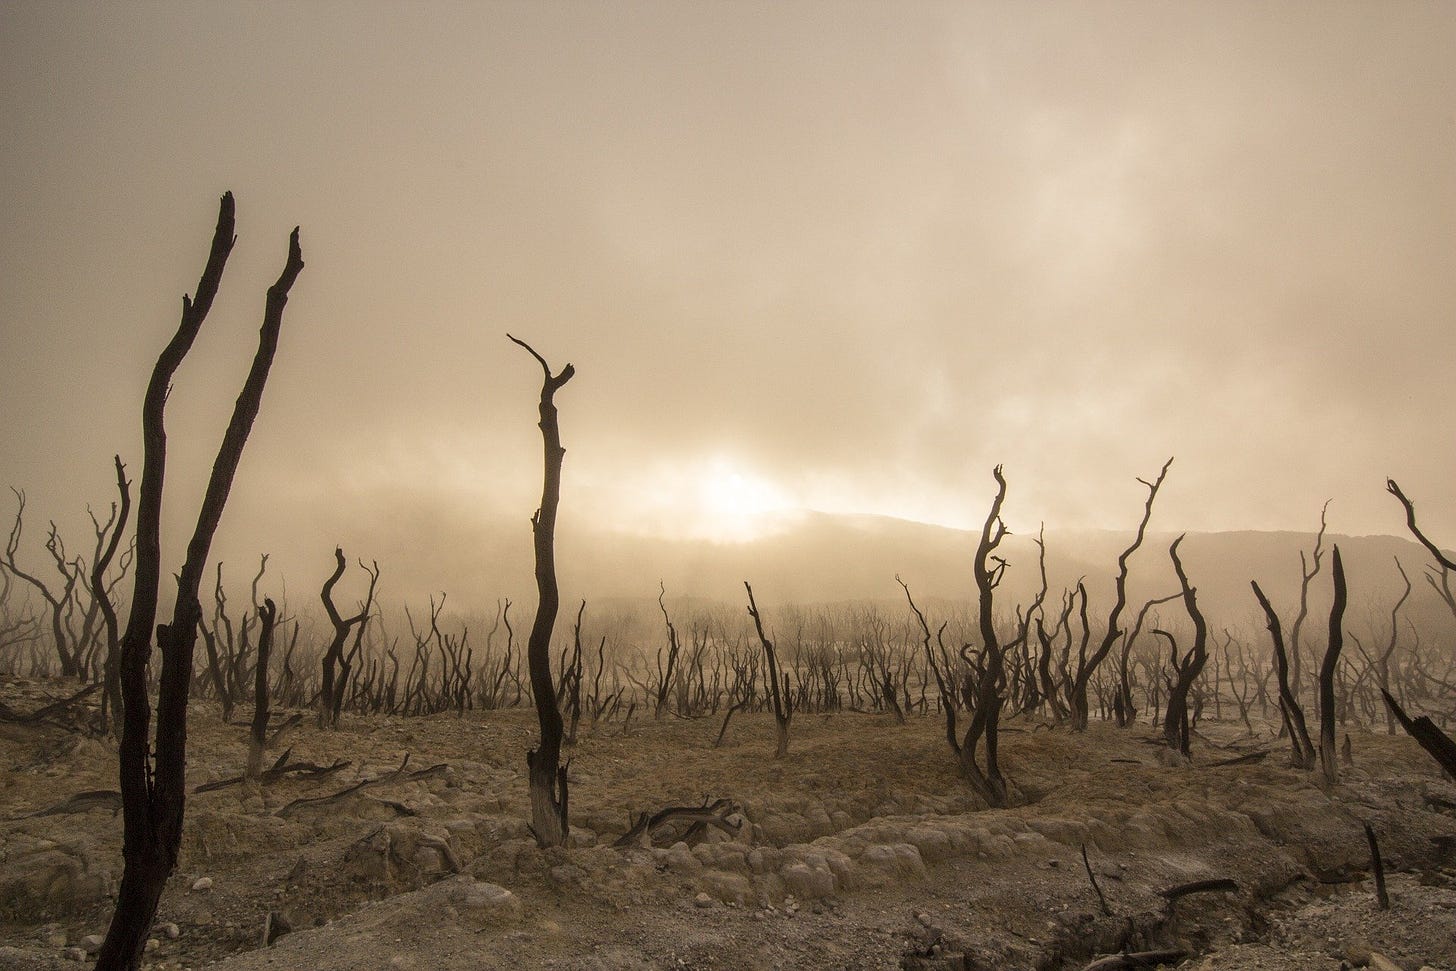 A picture of a dry world with dead trees. We need water!